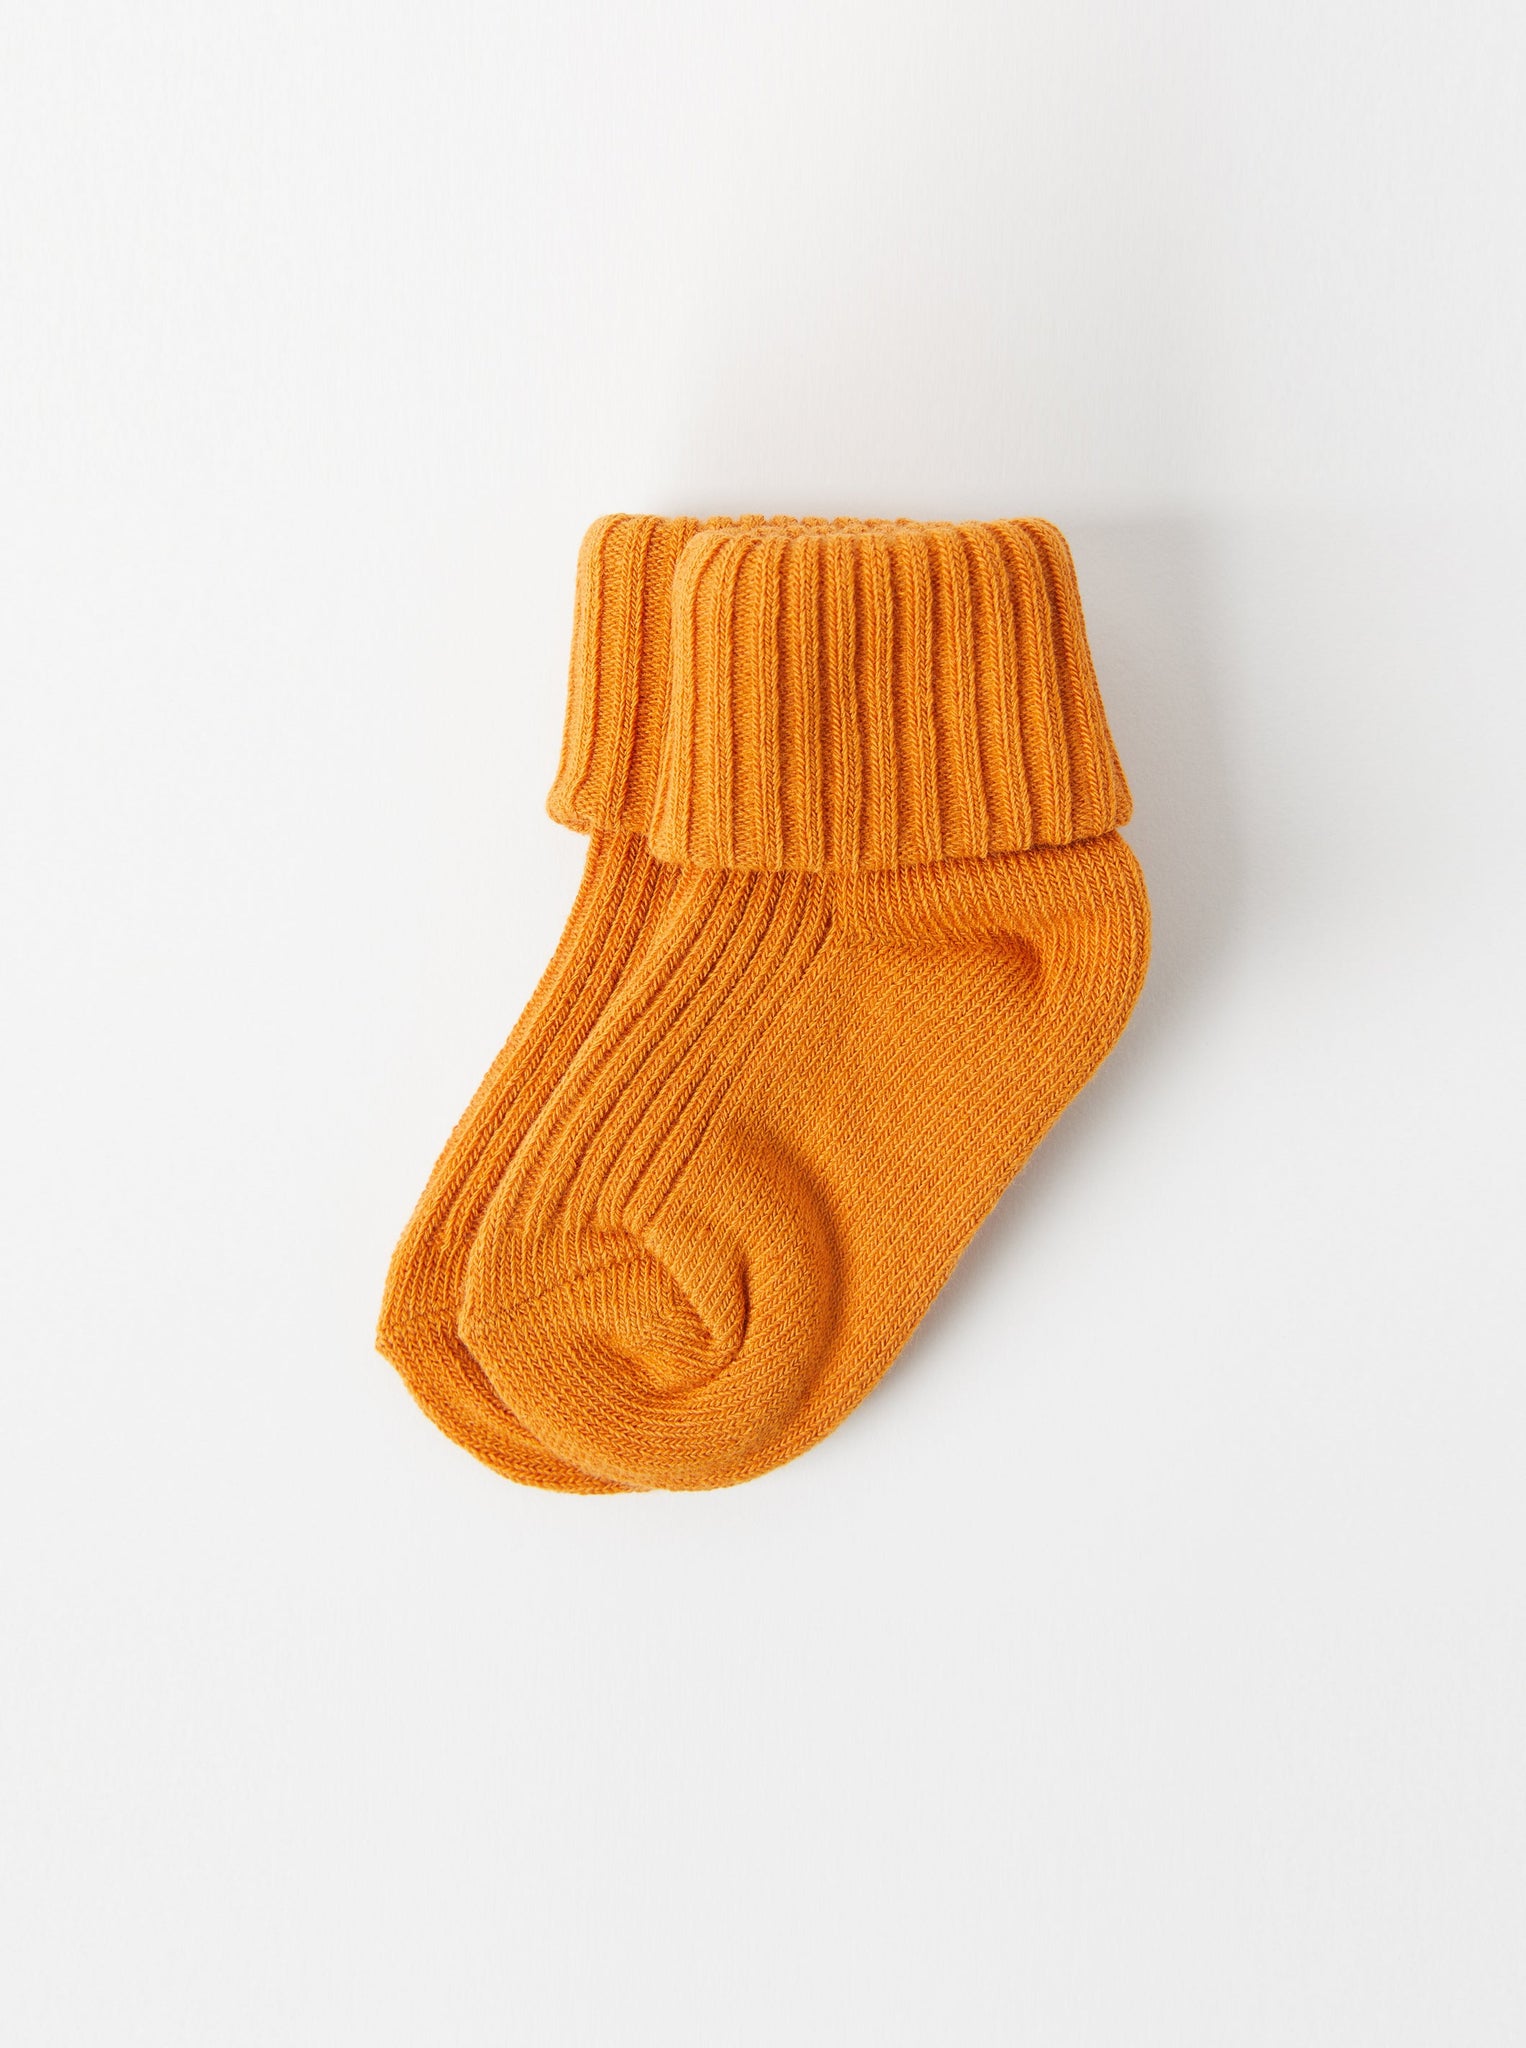 Organic Cotton Yellow Baby Socks from the Polarn O. Pyret Kidswear collection. Clothes made using sustainably sourced materials.